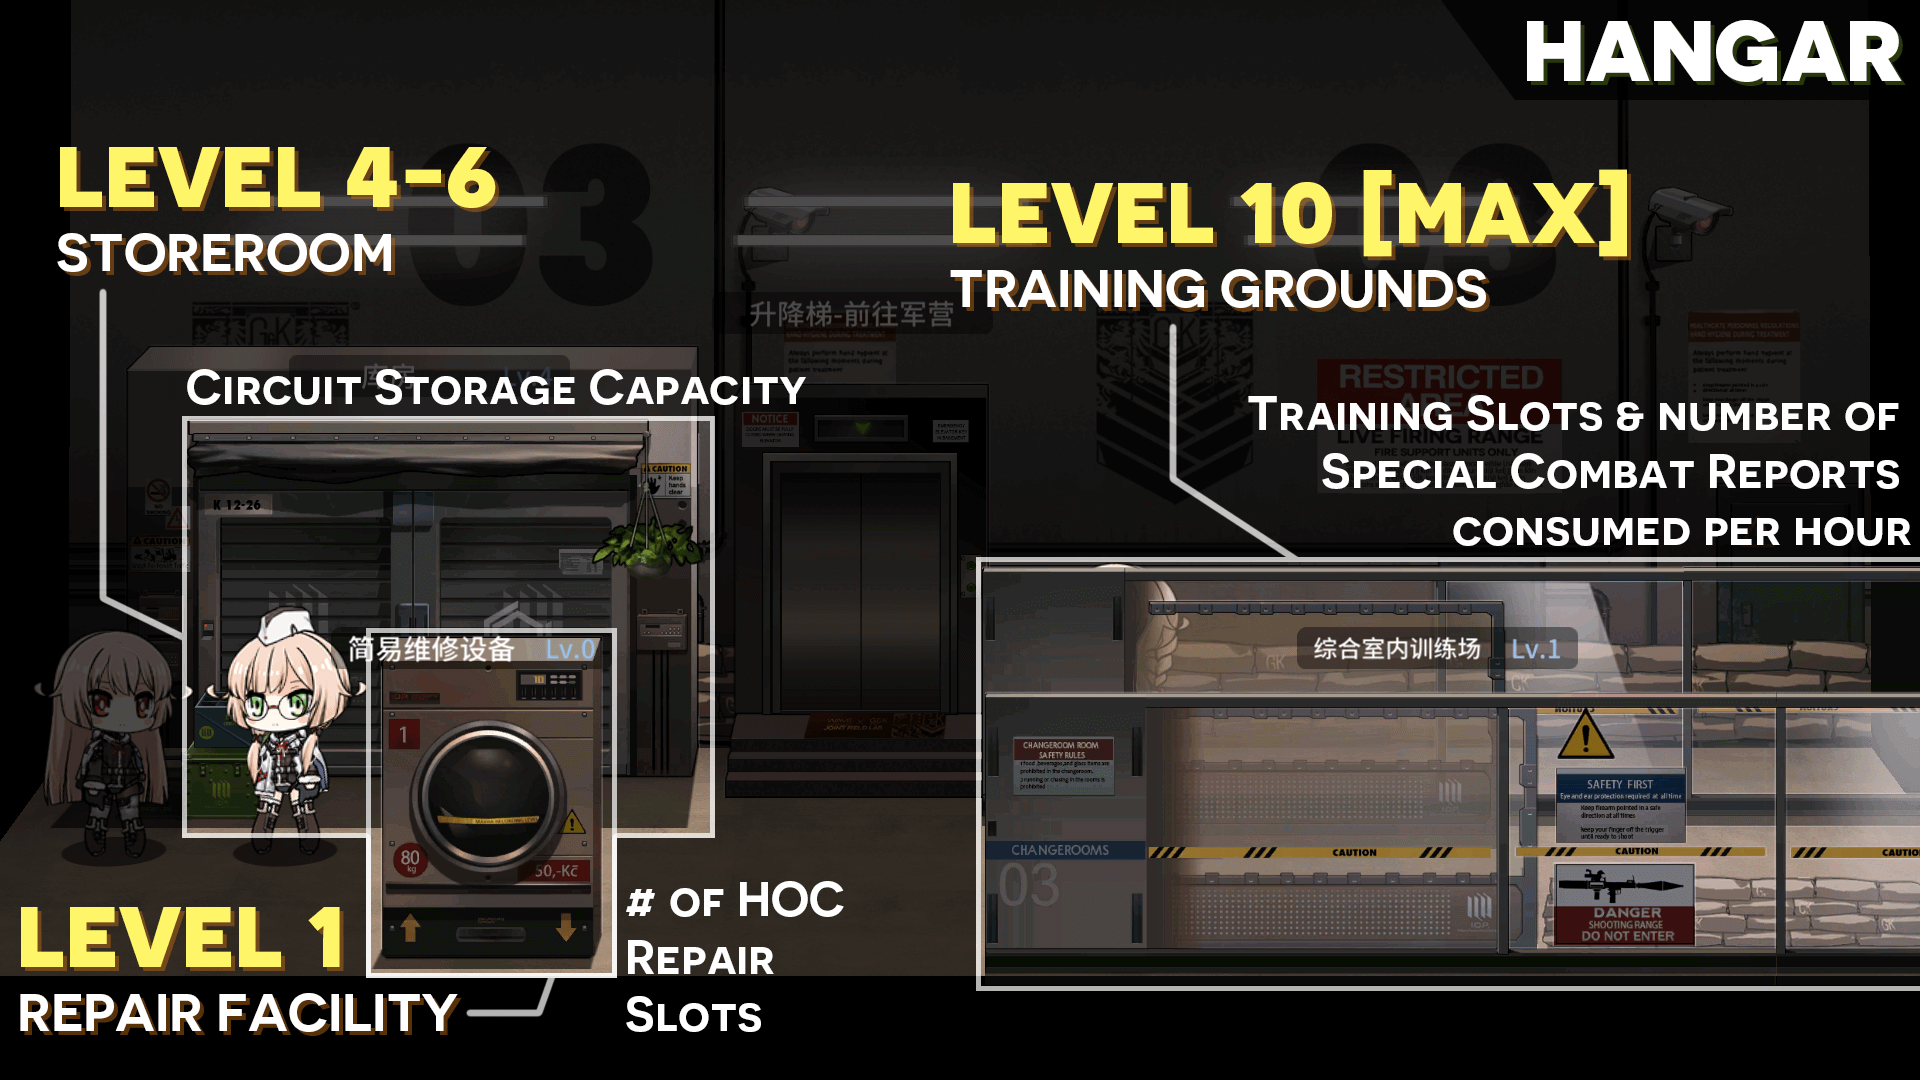 TL;DR Infographic on upgrading the Garage facilities